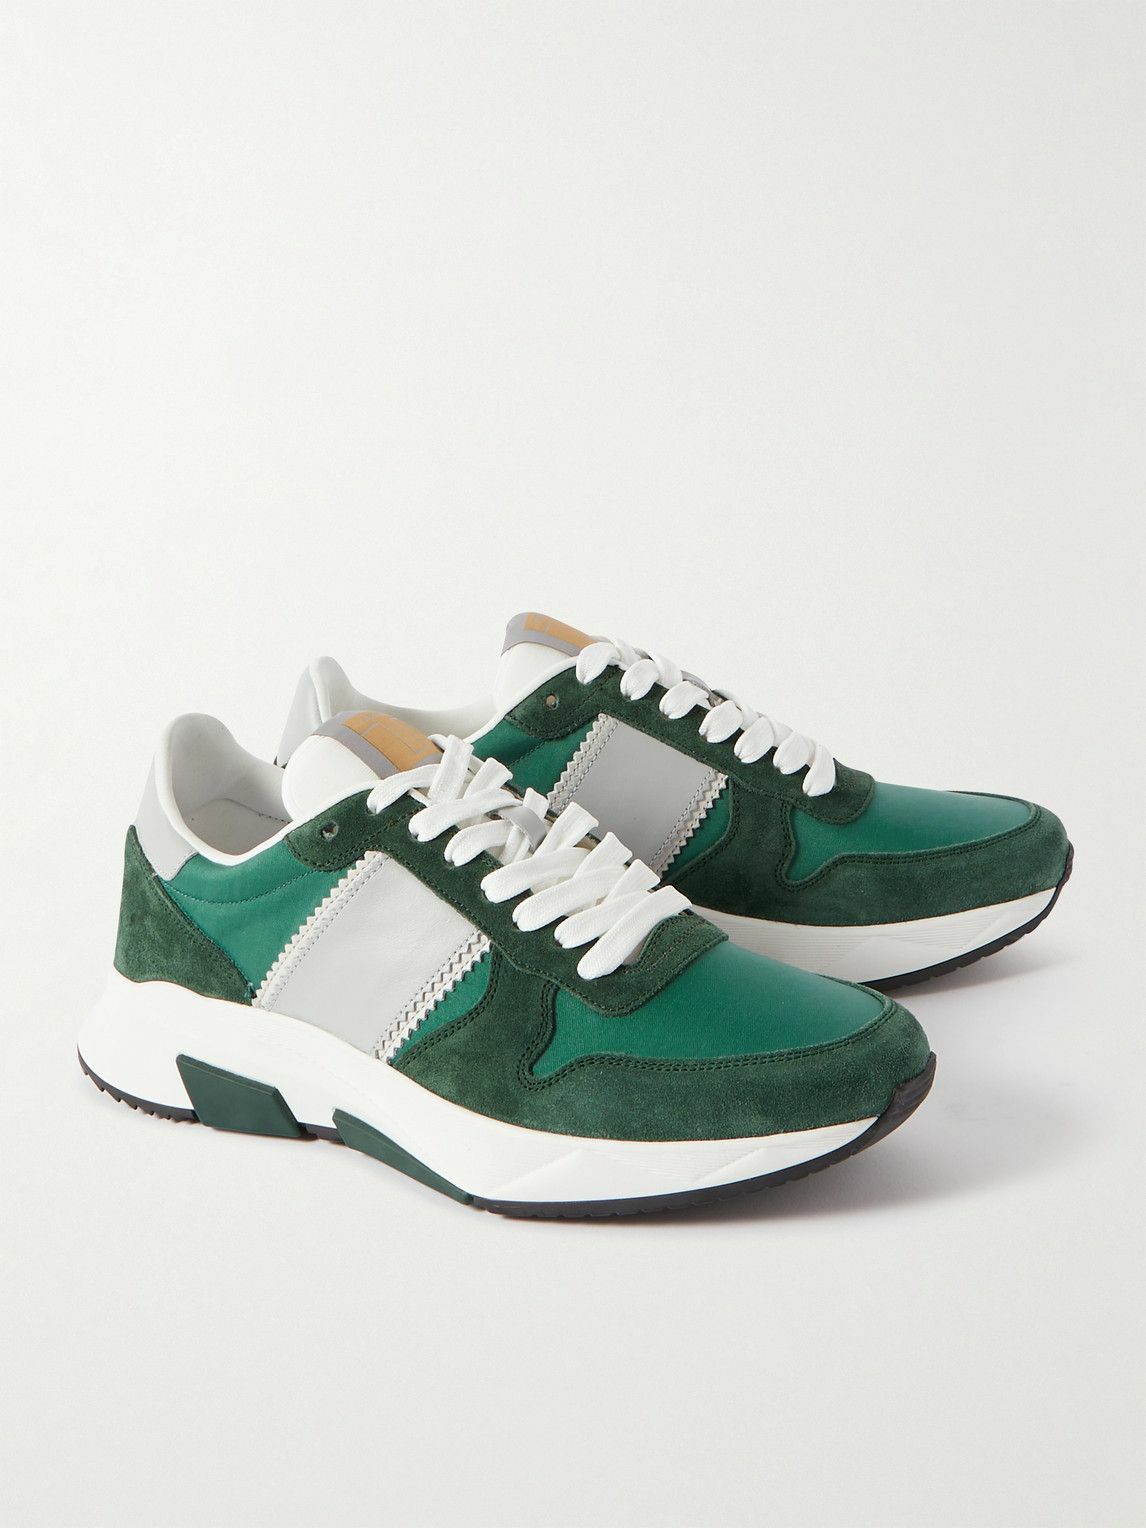 TOM FORD - Jagga Leather-Trimmed Nylon and Suede Sneakers - Green TOM FORD